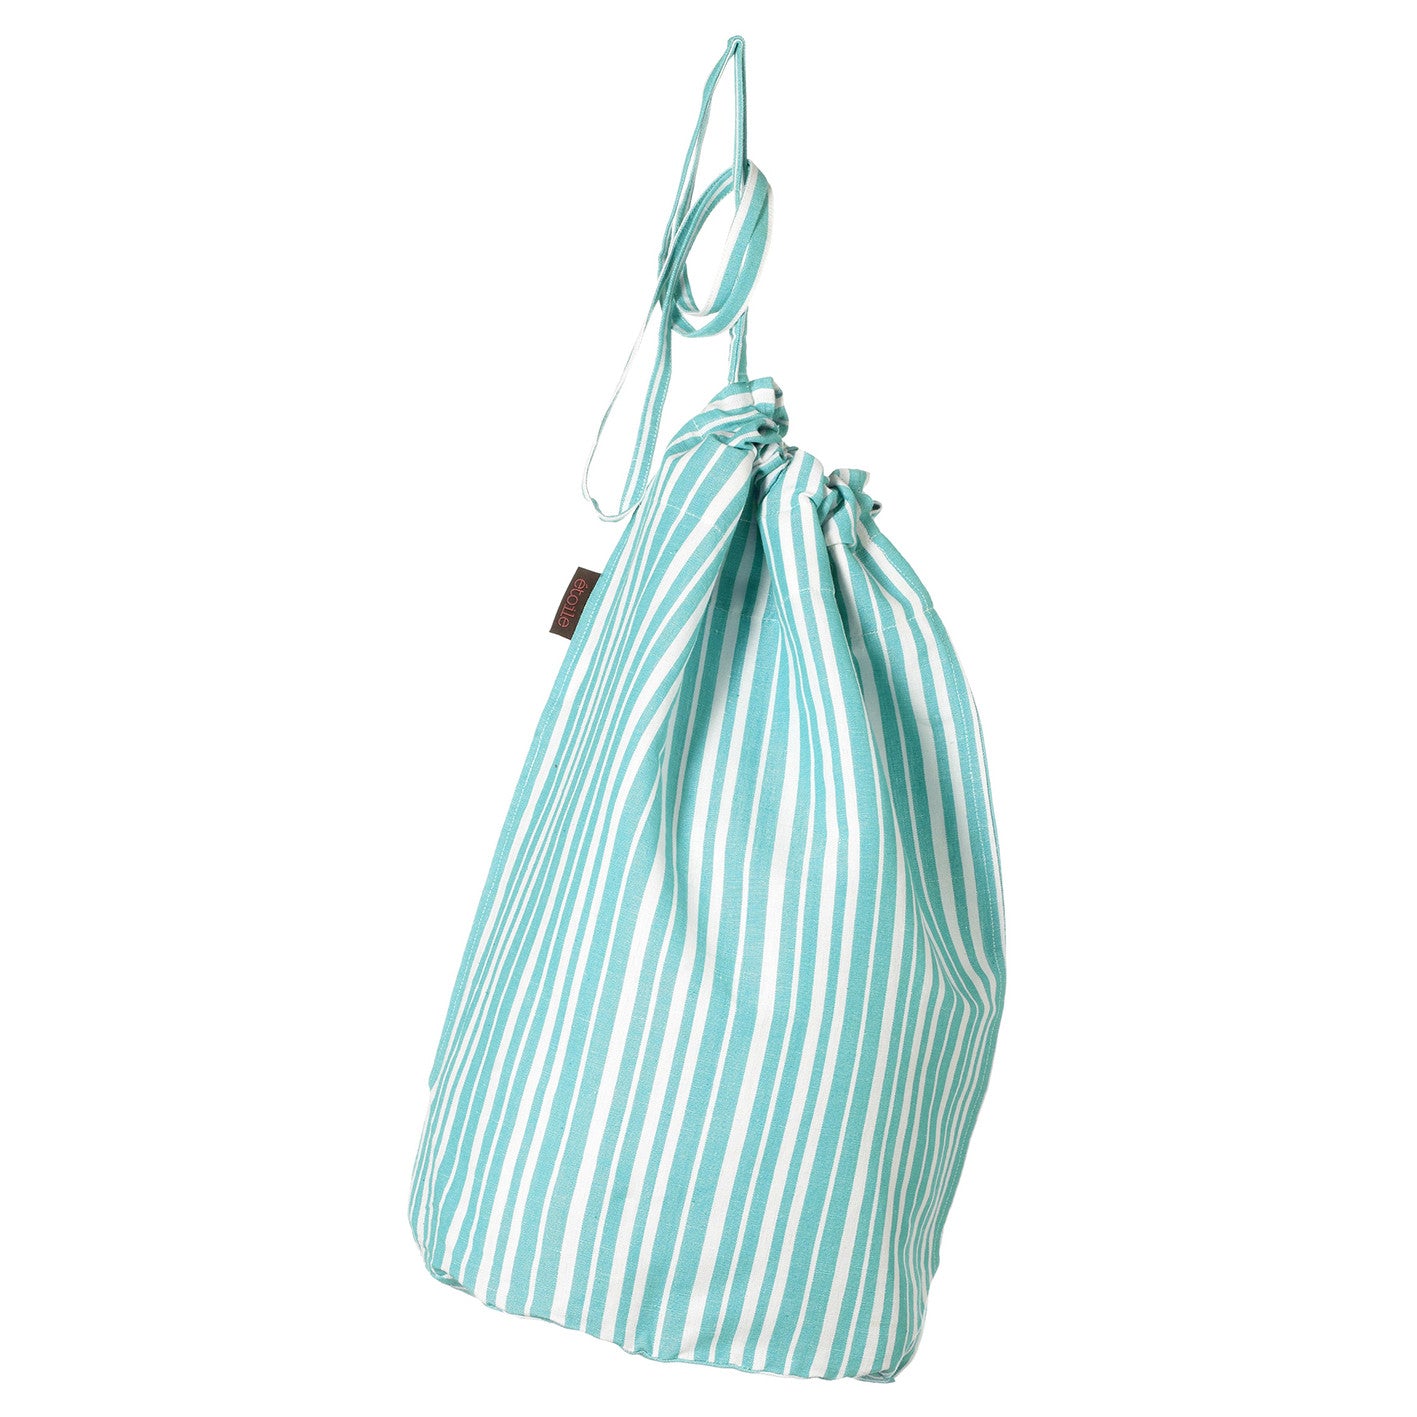 Palermo Ticking Stripe Cotton Linen Drawstring Laundry & Storage Bag in Pacific Turquoise Blue Ships from Canada (USA)